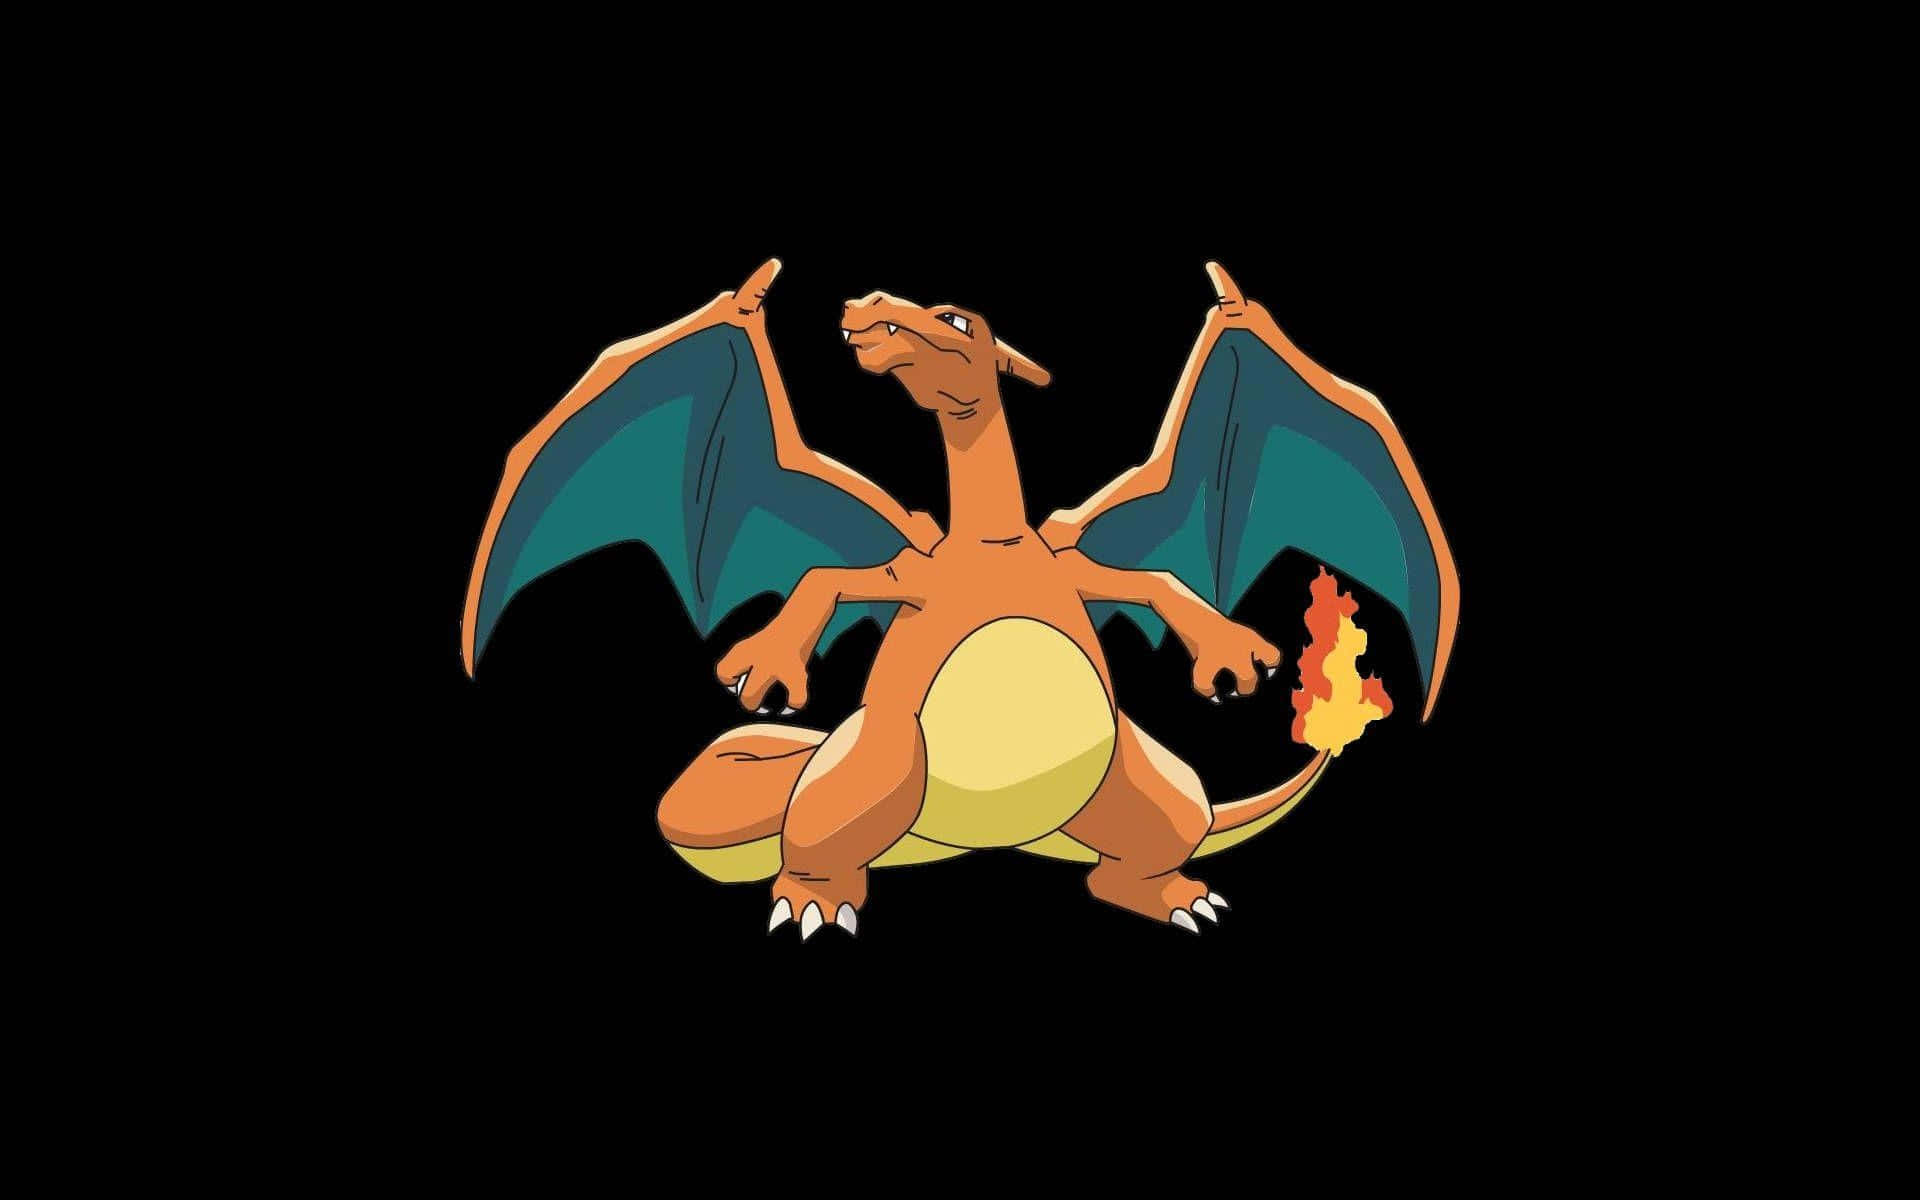 Charizard breathing fire against a colorful sky in its powerful, battle-ready stance